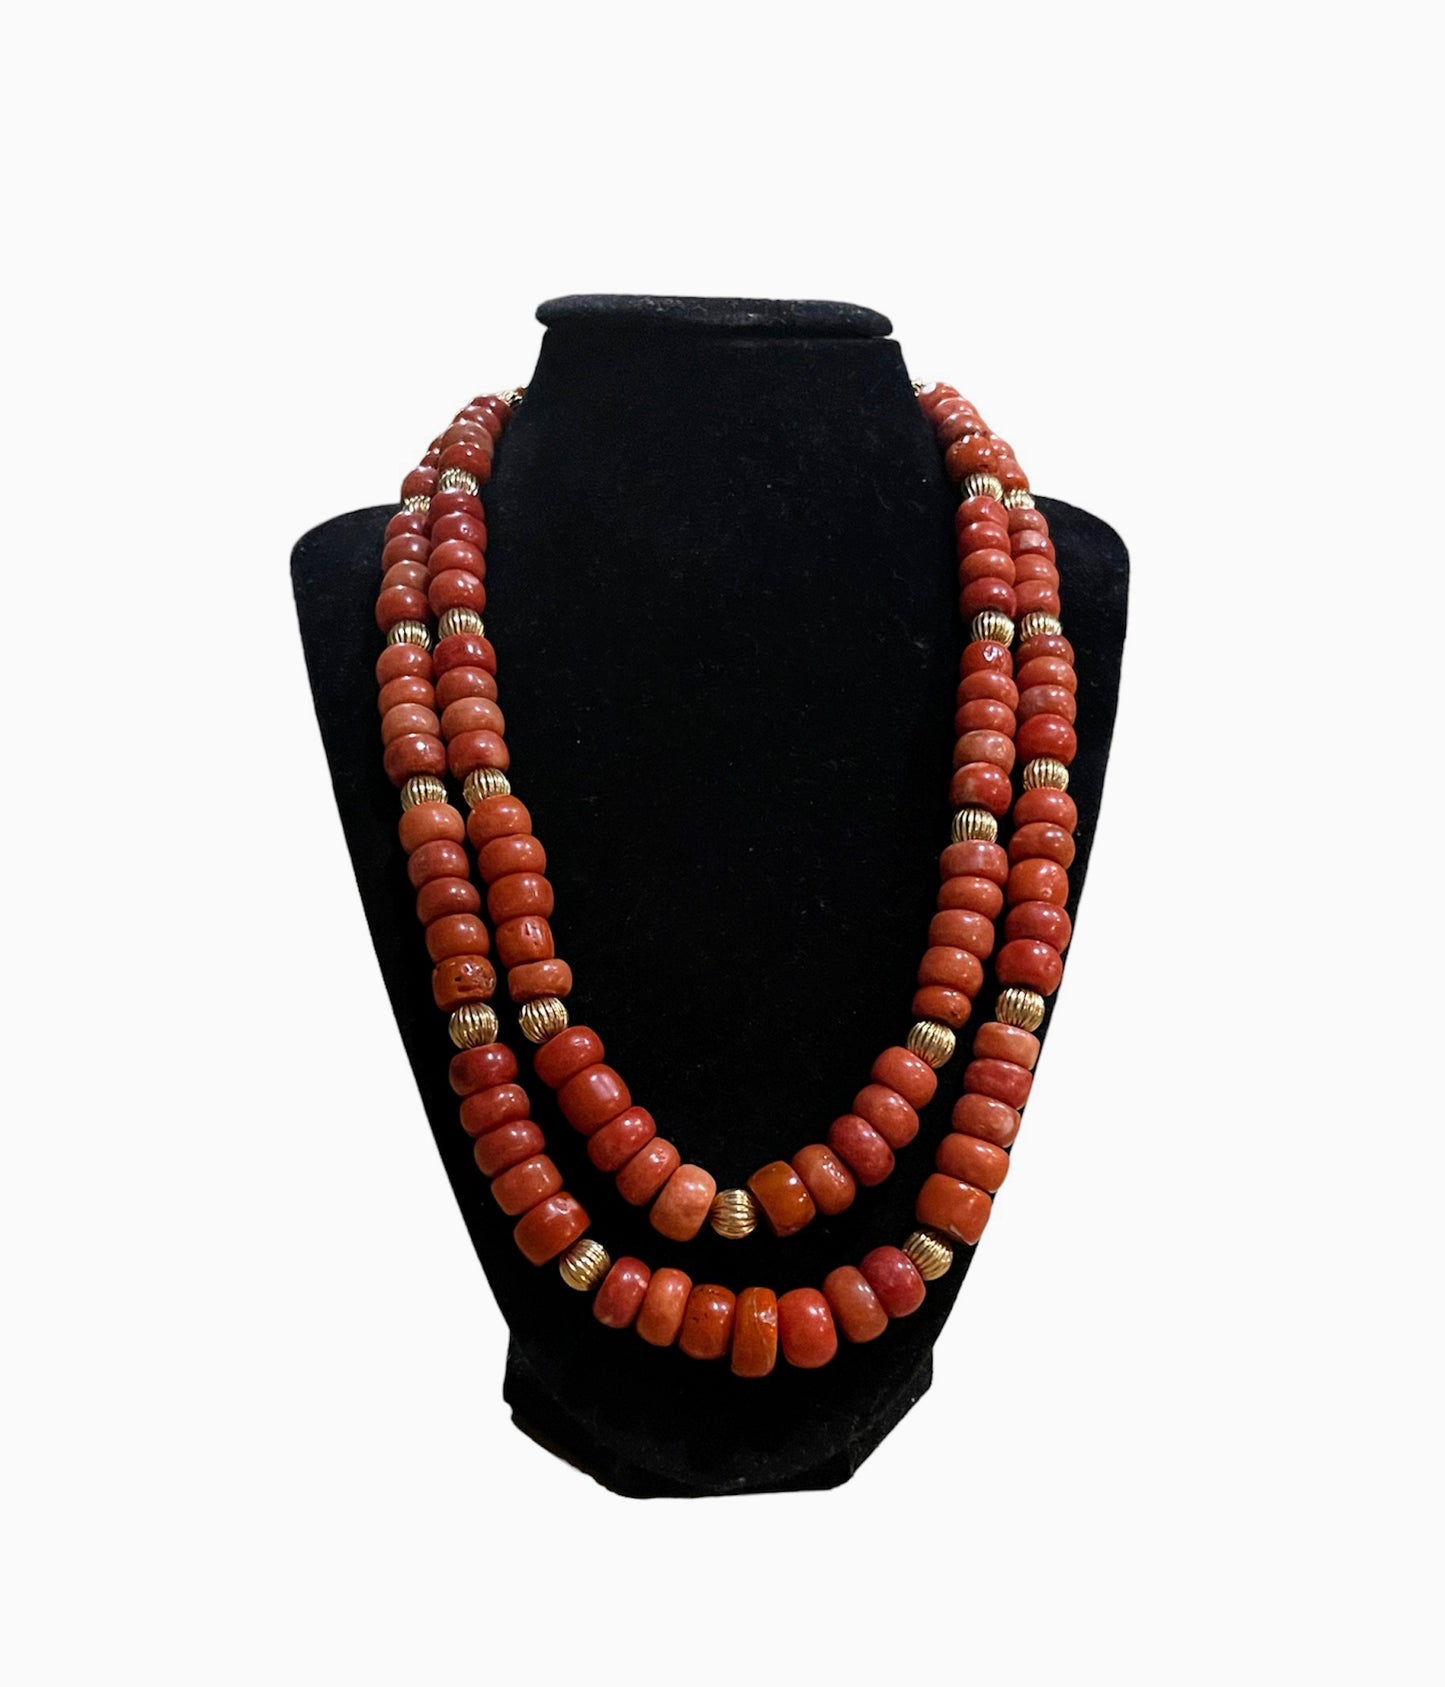 A coral and gold bead necklace